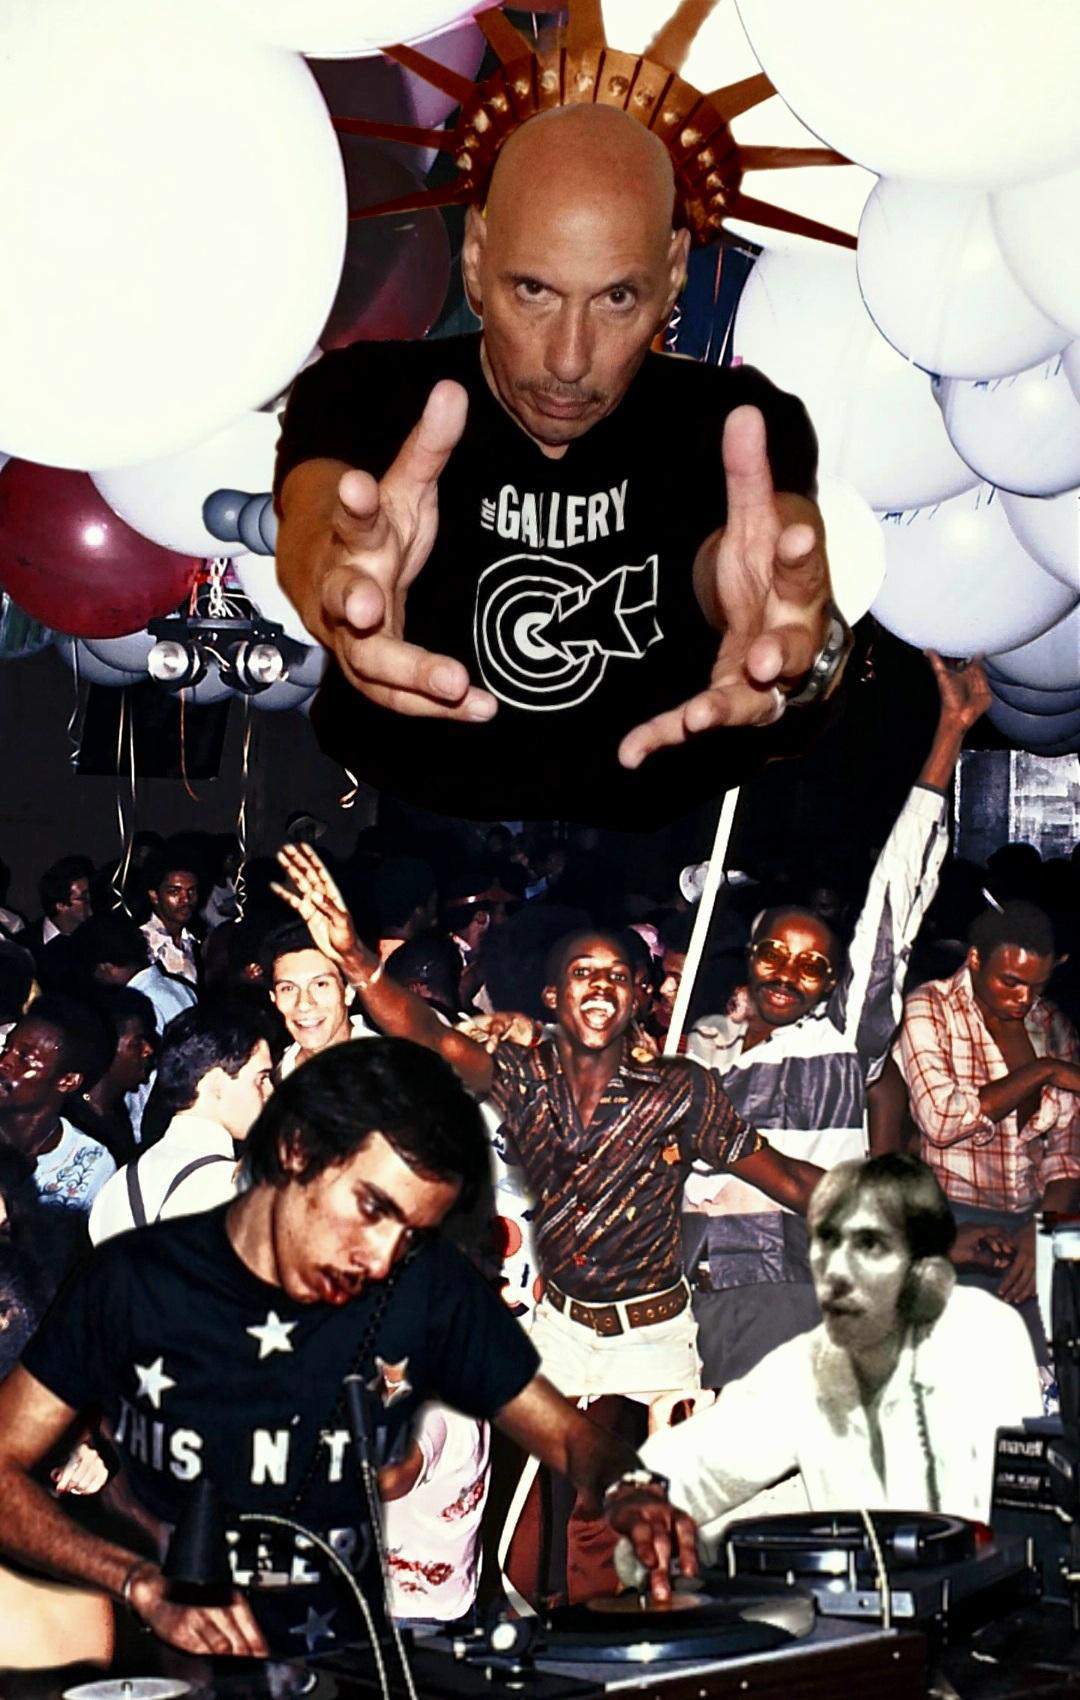 Still Dancing: A Night at the Gallery Pride Party with Nicky Siano (NYC) - Página frontal